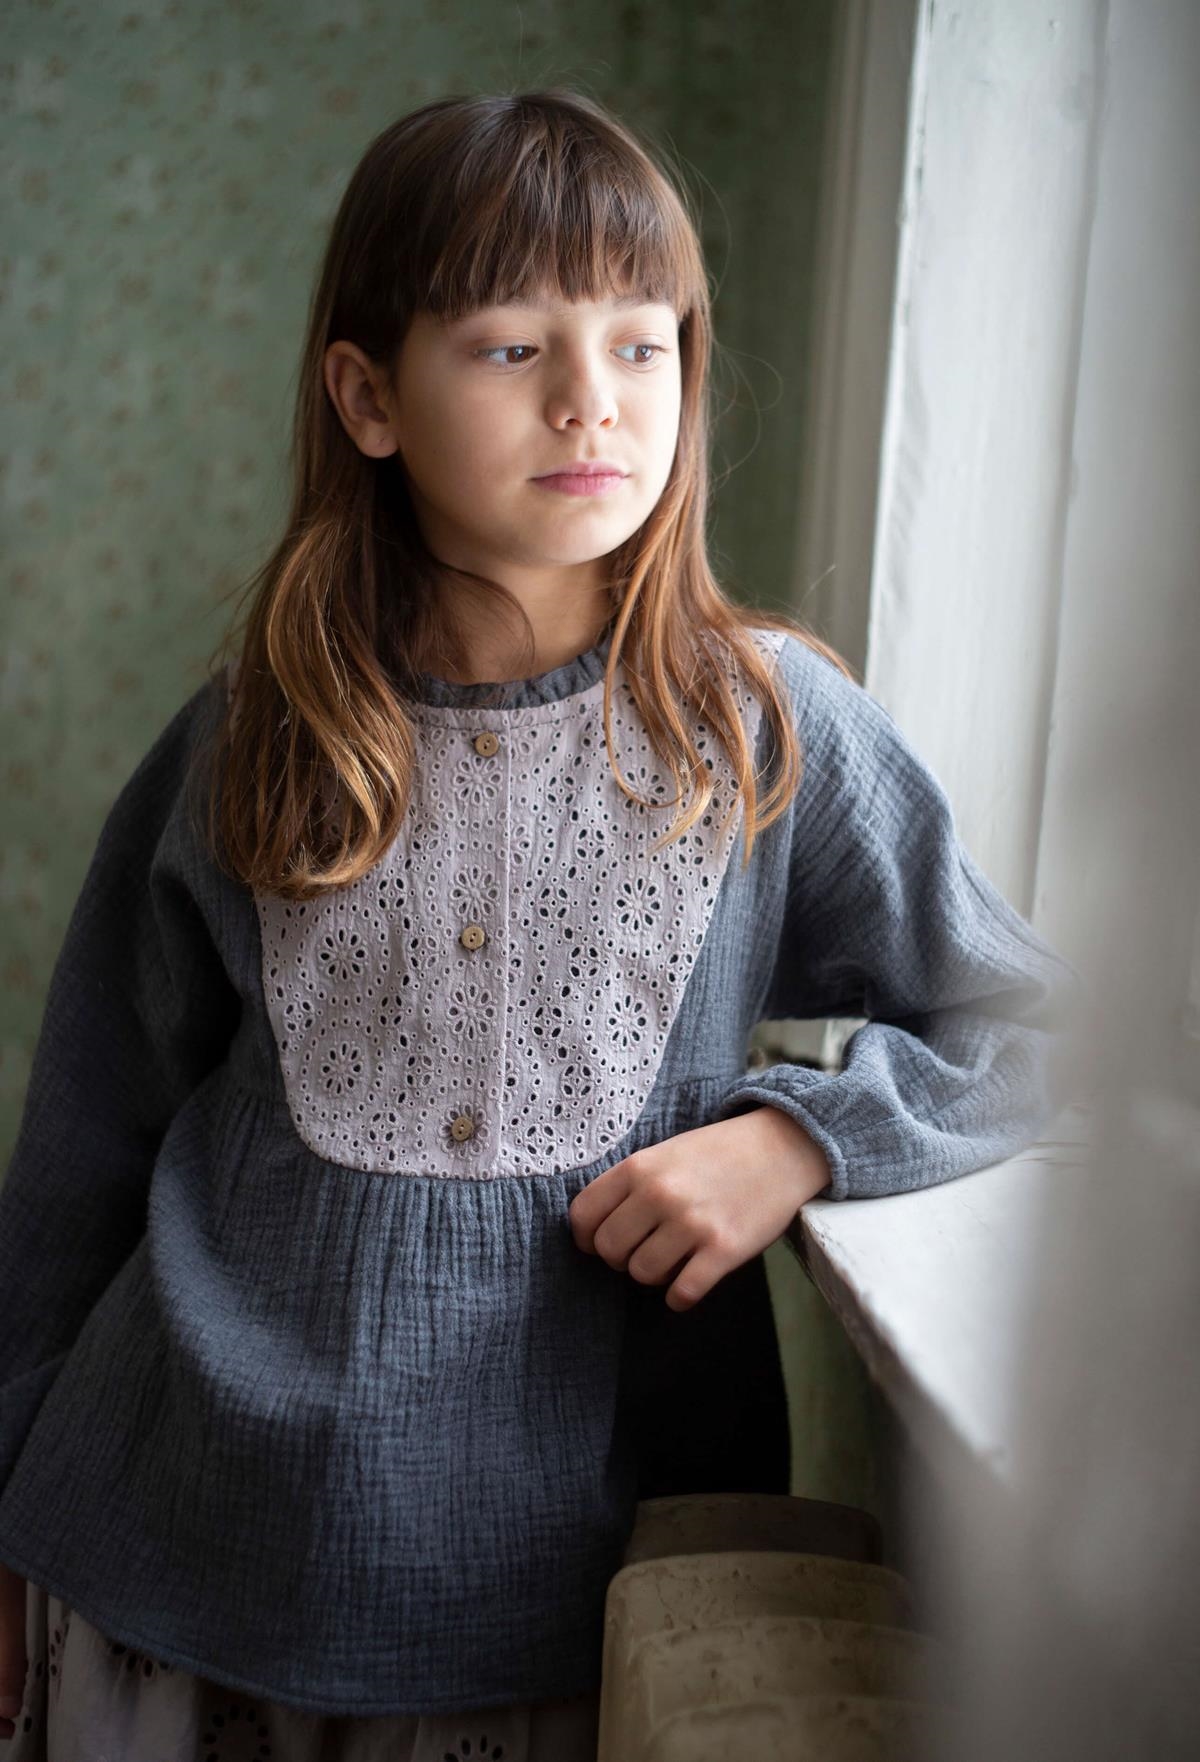 Mod.14.2 Dark grey blouse with yoke and Swiss embroidery | AW22.23 Mod.14.2 Dark grey blouse with yoke and Swiss embroidery